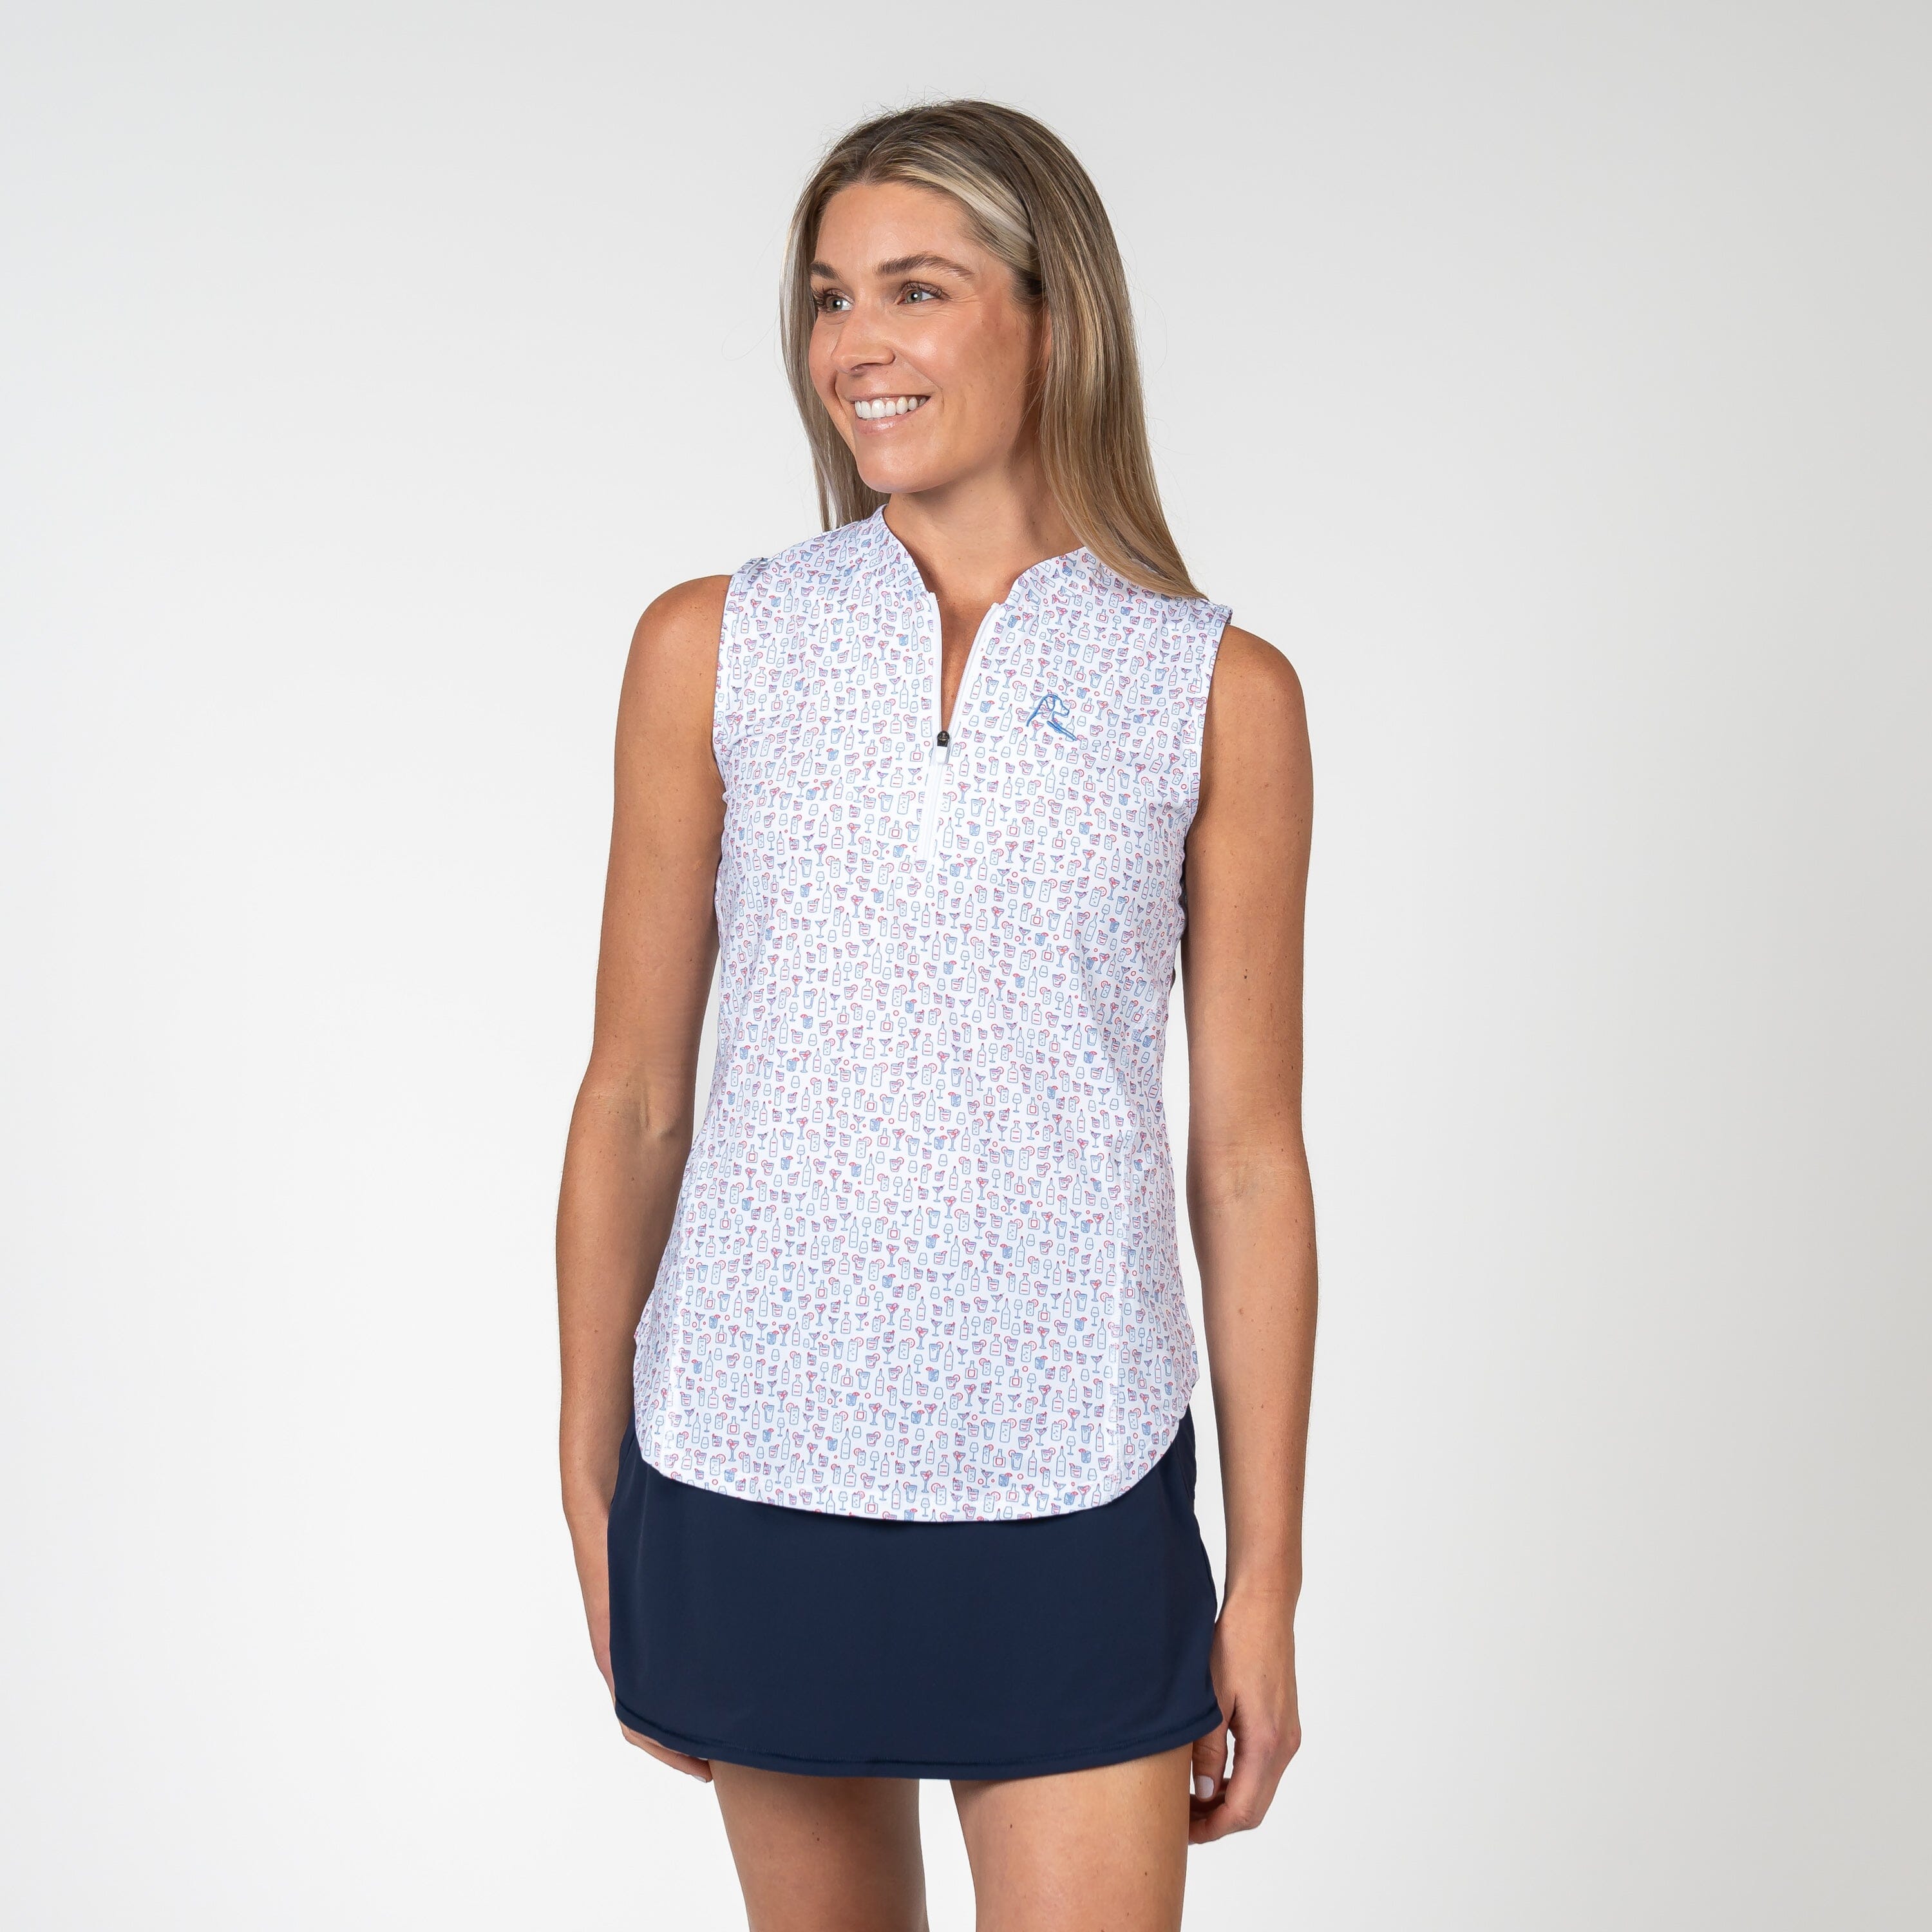 The Cocktail Of Cocktails Sleeveless Zip | The Cocktail Of Cocktails - White